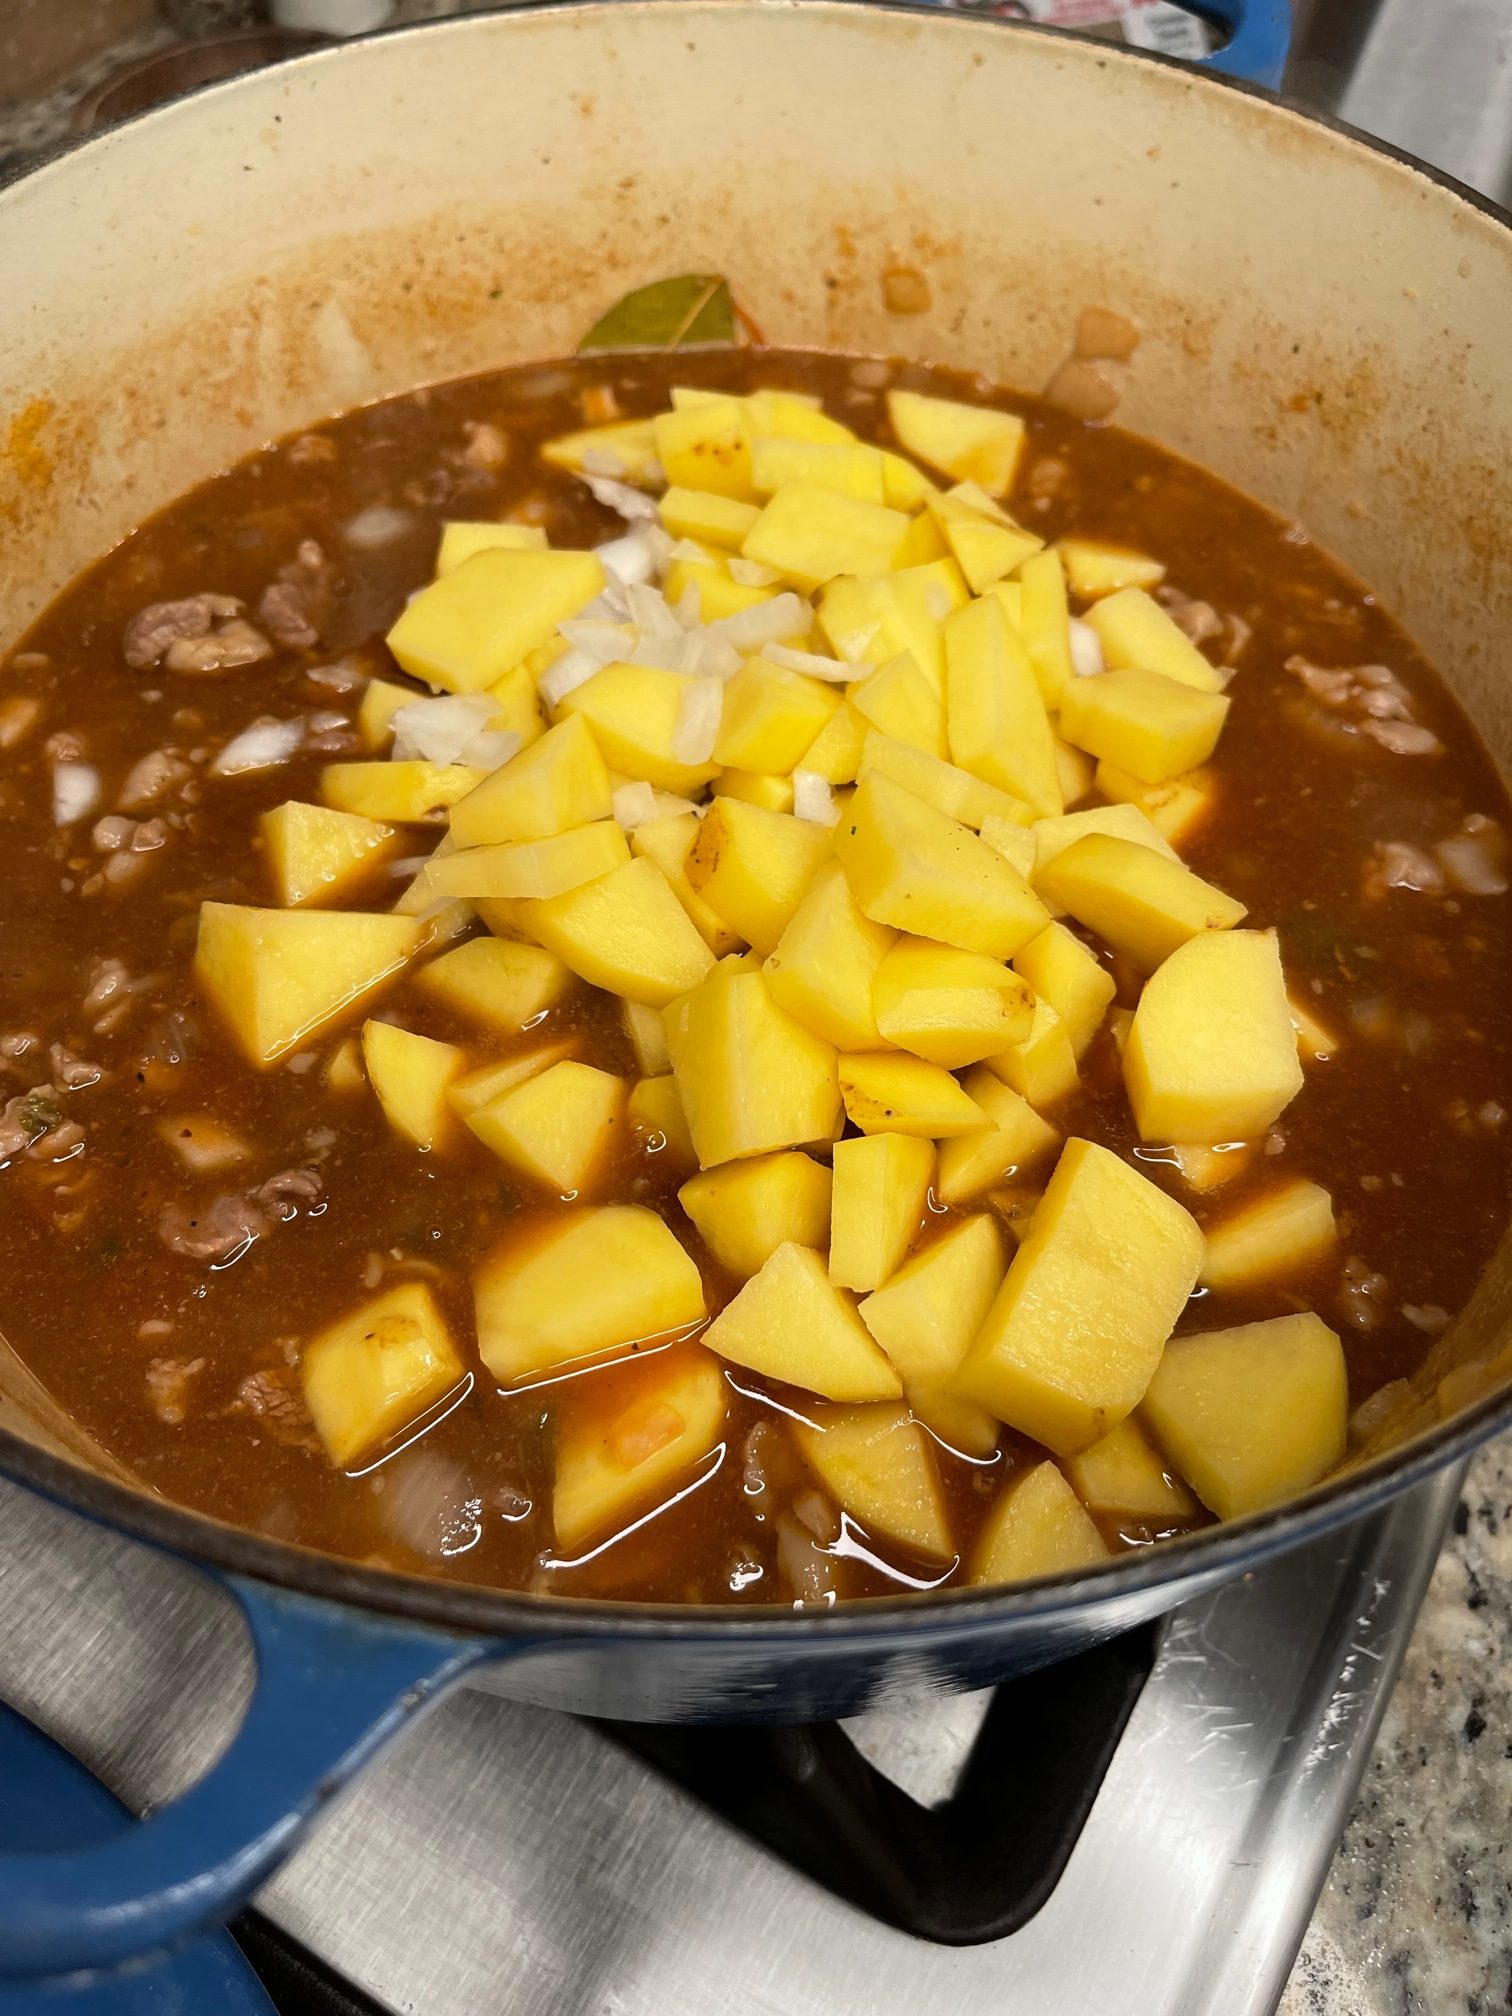 Carne Guisada being made - this picture shows the raw potatoes going into the pot